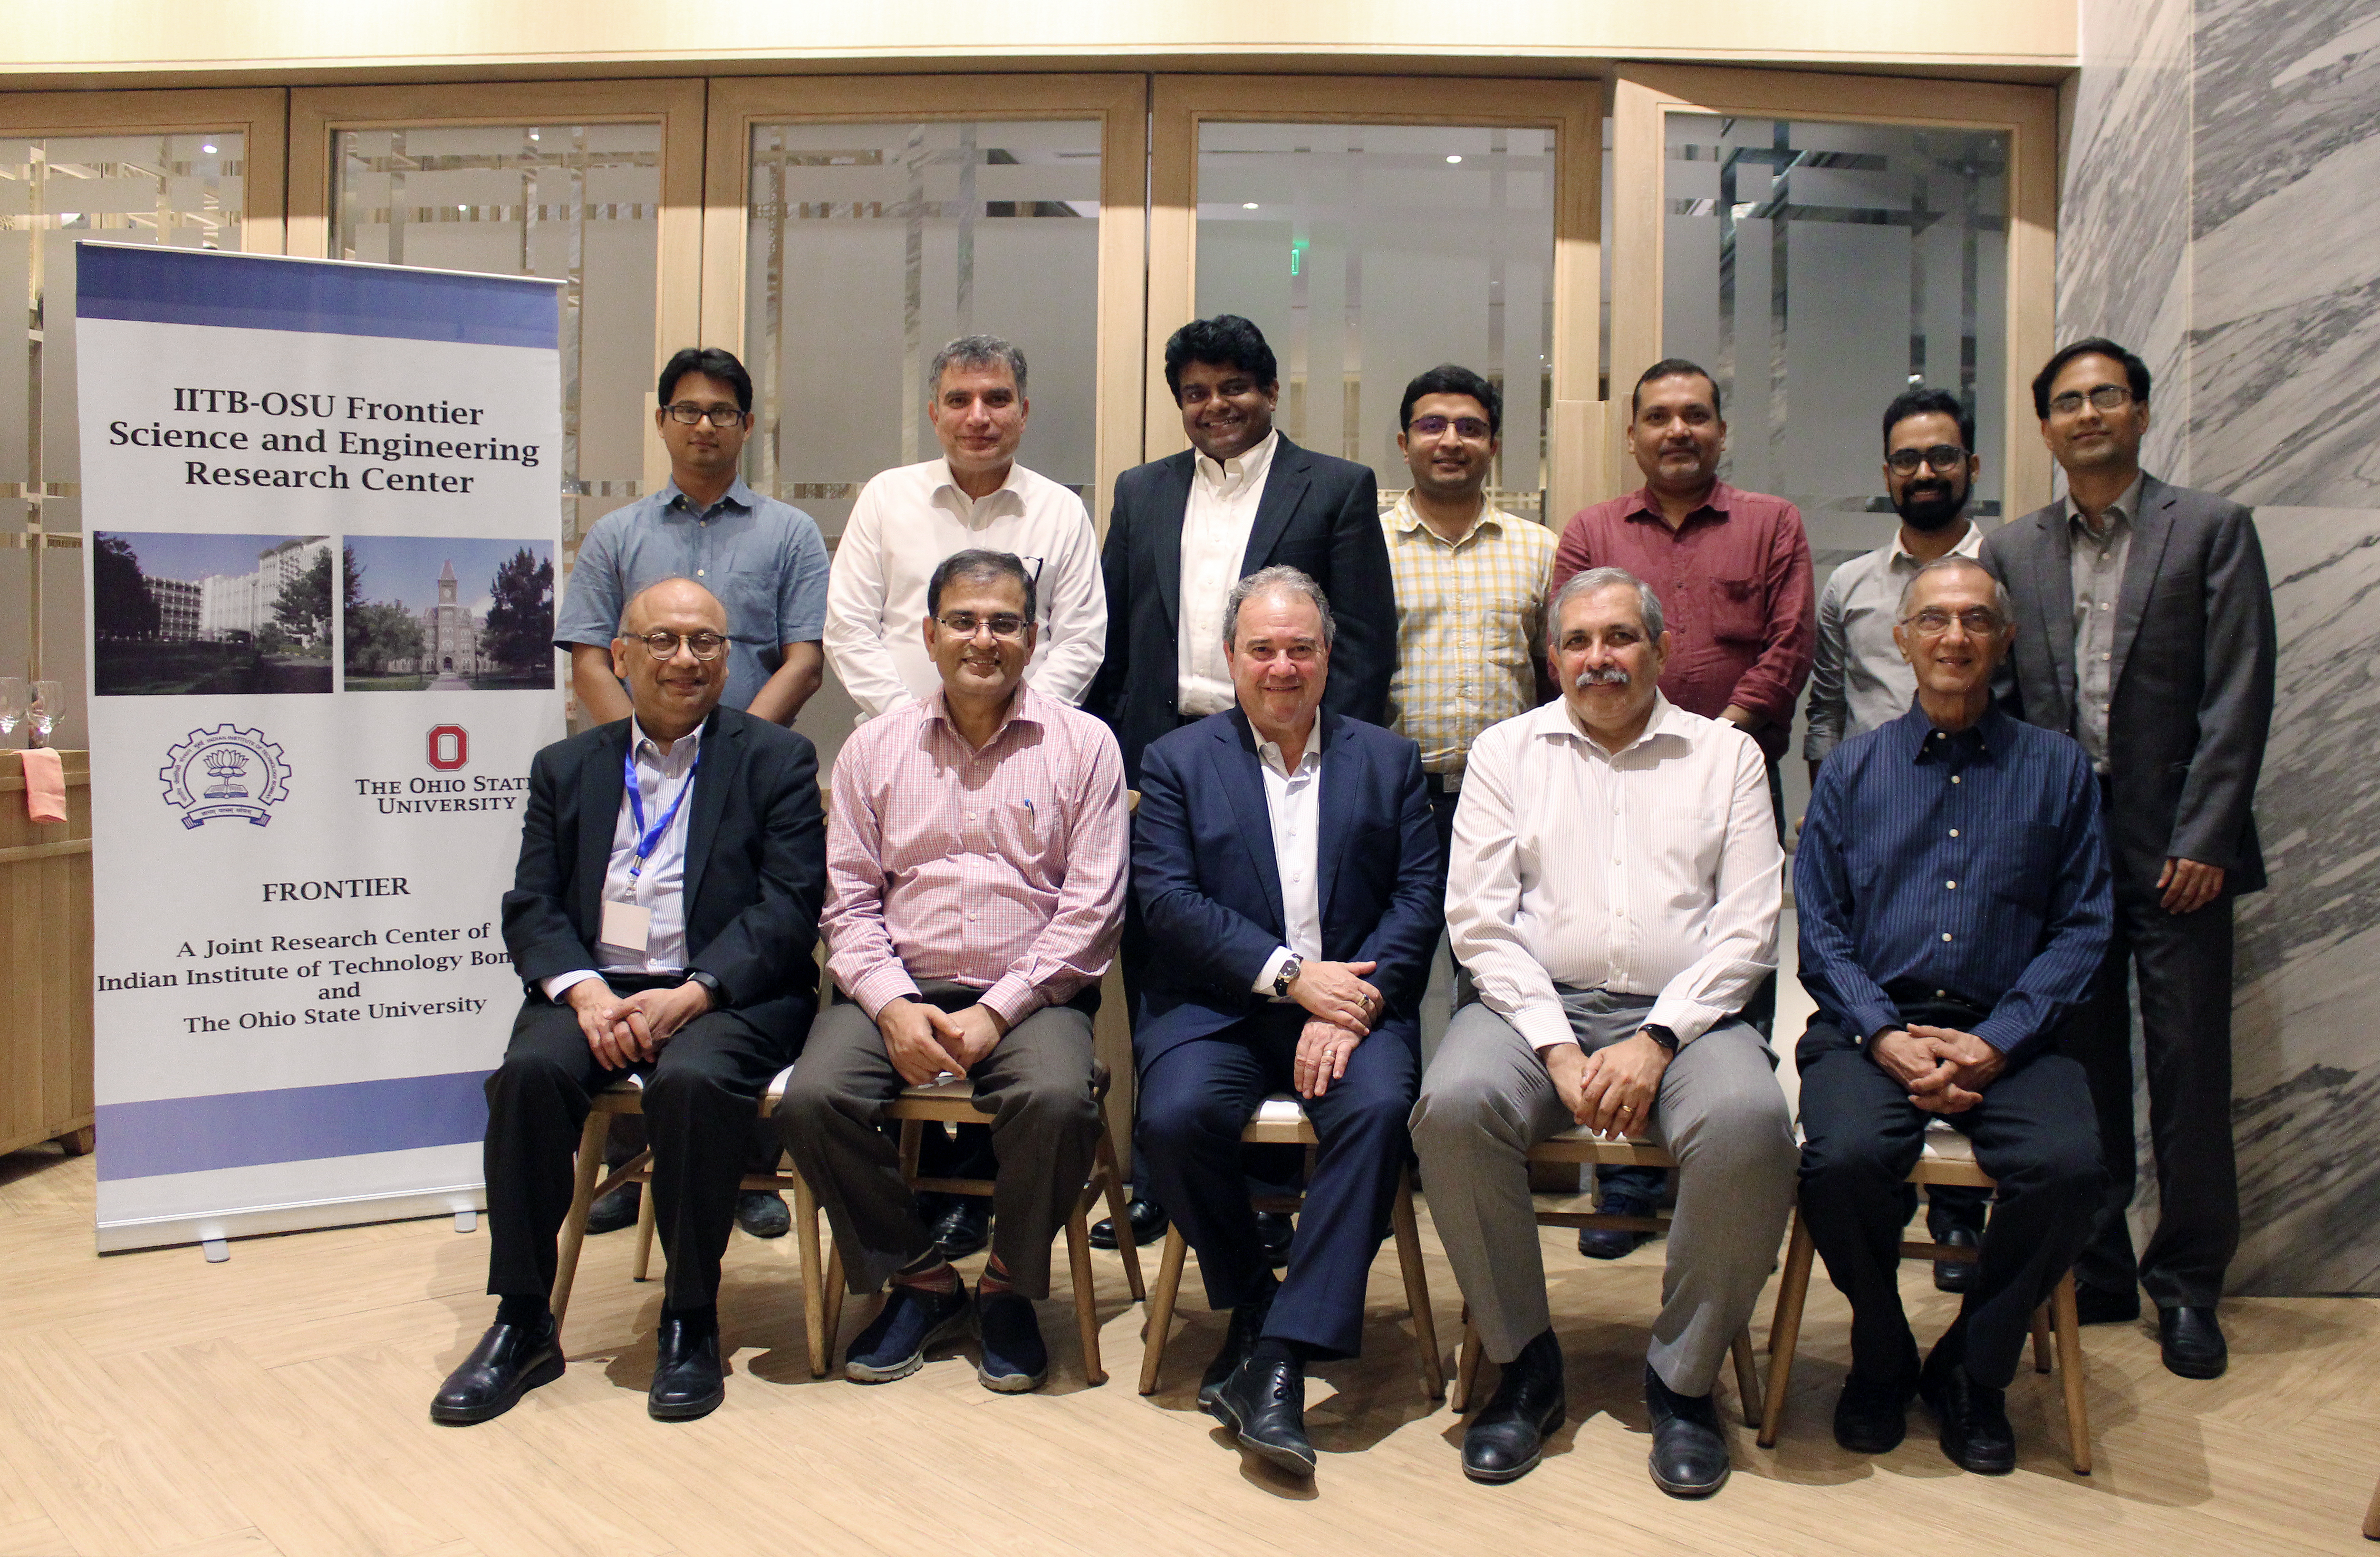 IIT Bombay and IMR representatives gather in Mumbai shortly after launching the Frontier initiative in April 2019.